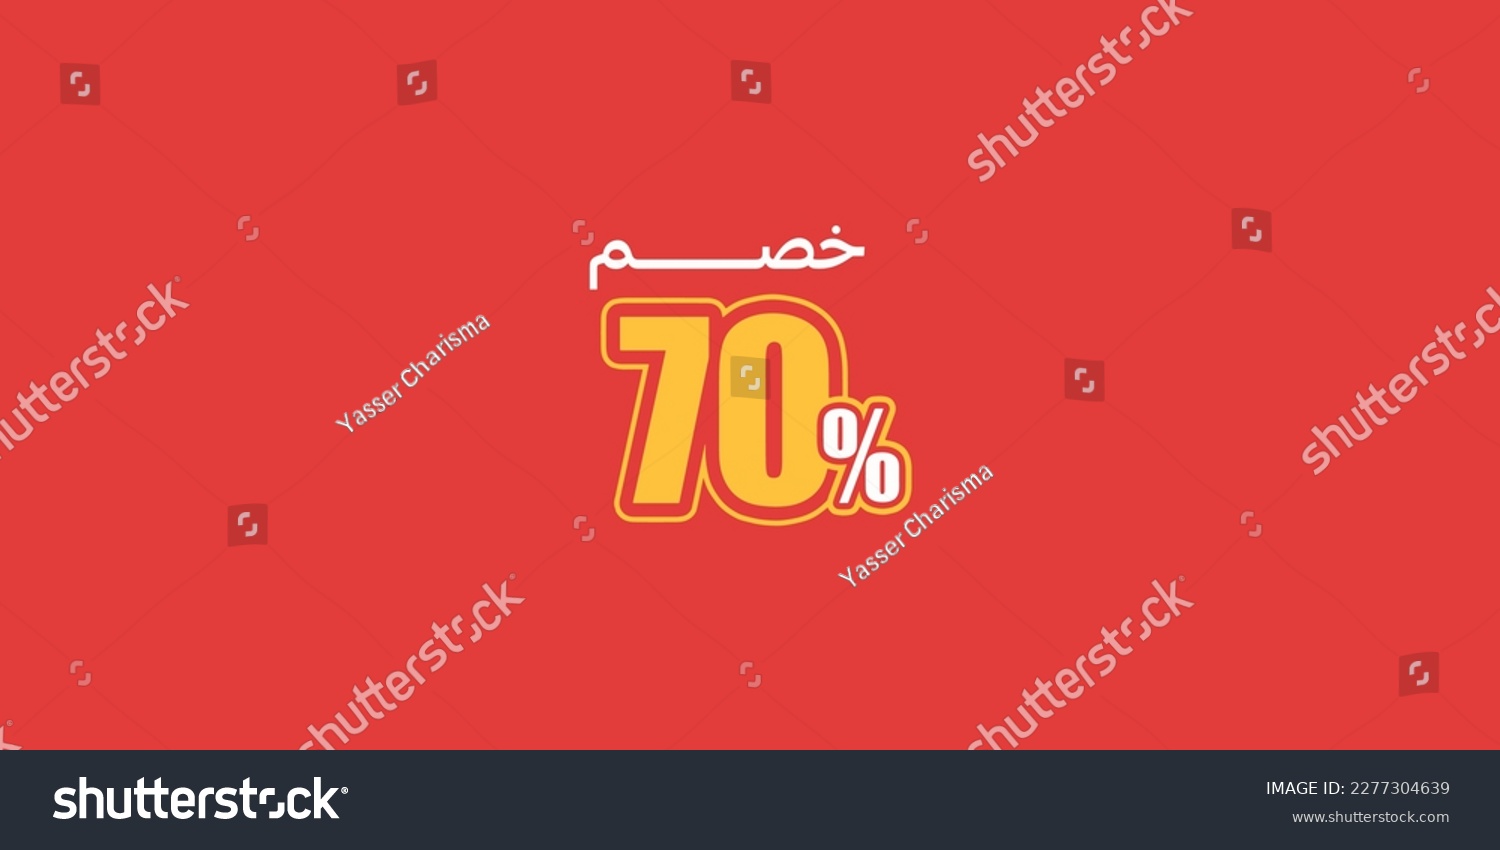 SVG of Sale off discount promotion set made of  numbers . Vector Illustration of  70% percent discount arabic for your unique selling poster, banner ads.
 svg